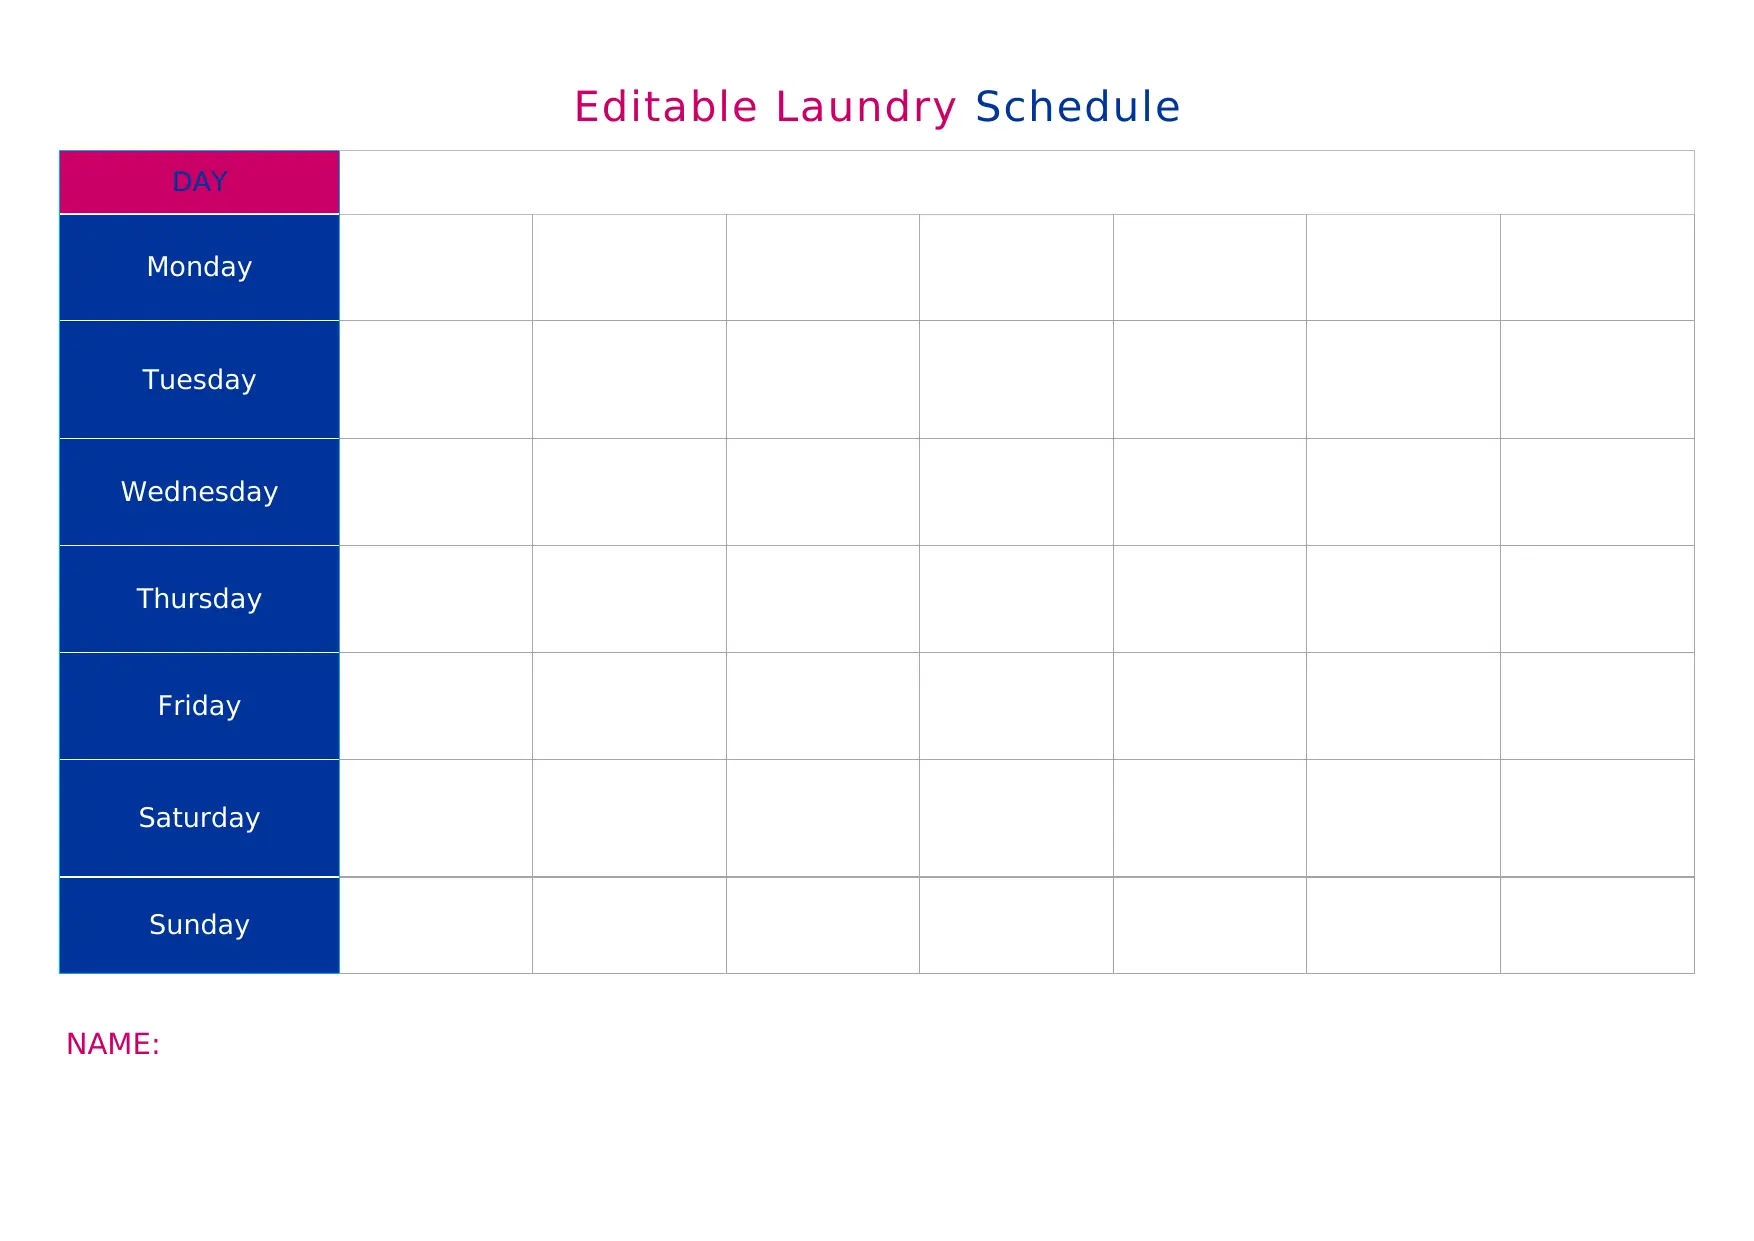 Editable Laundry Schedule Template